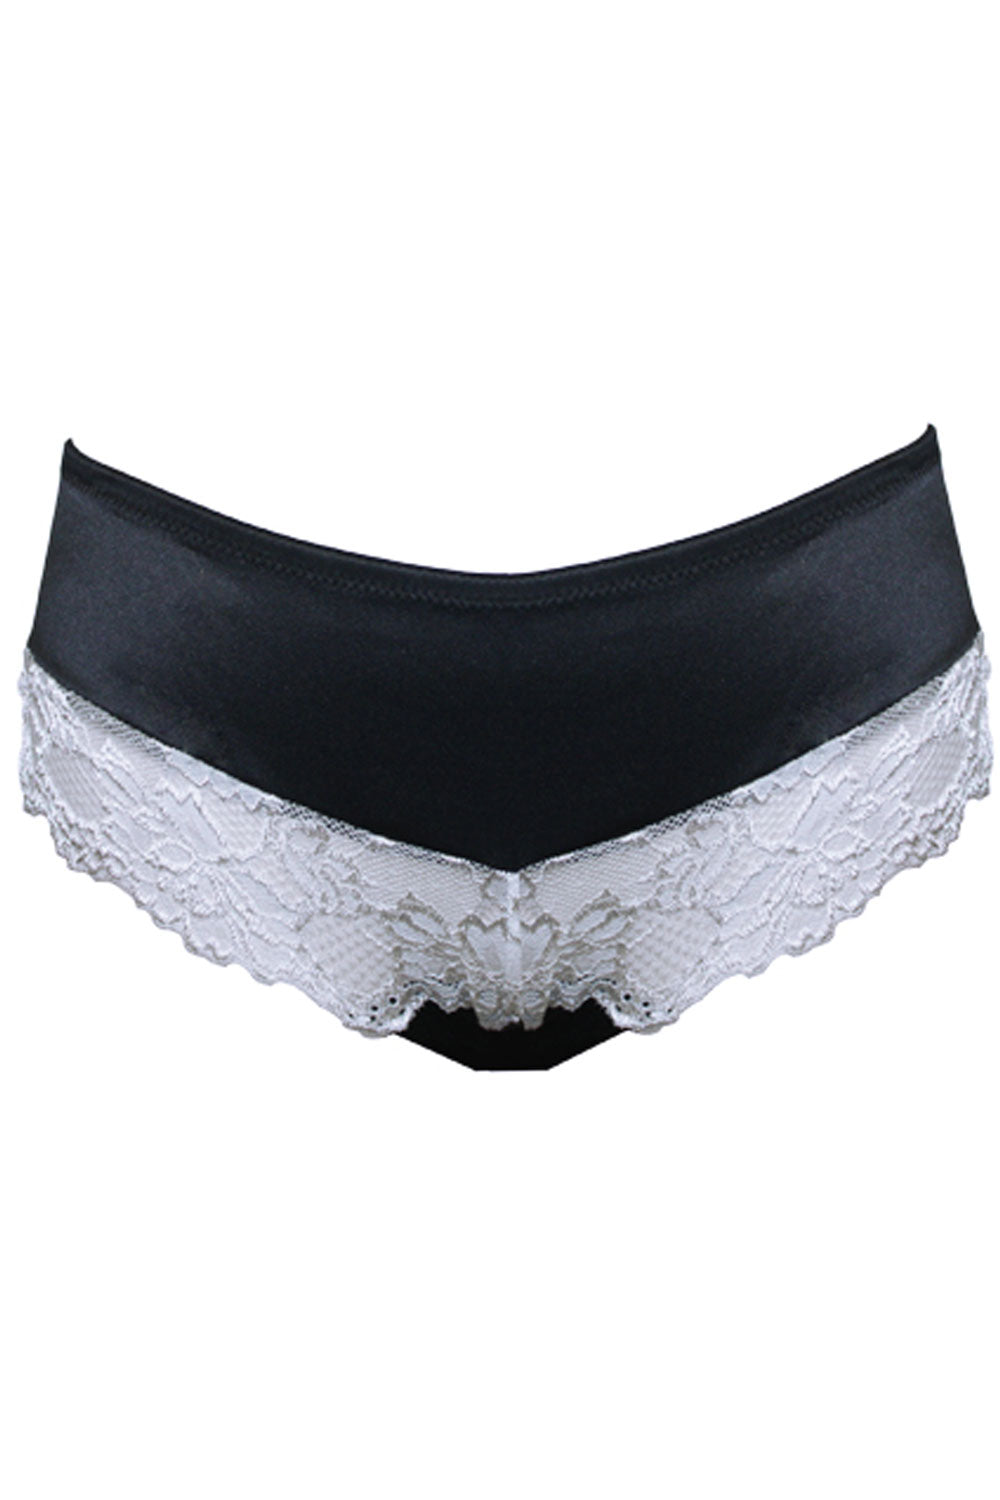 Decadent Fashion Panty Icollection TiaLyn 9627X